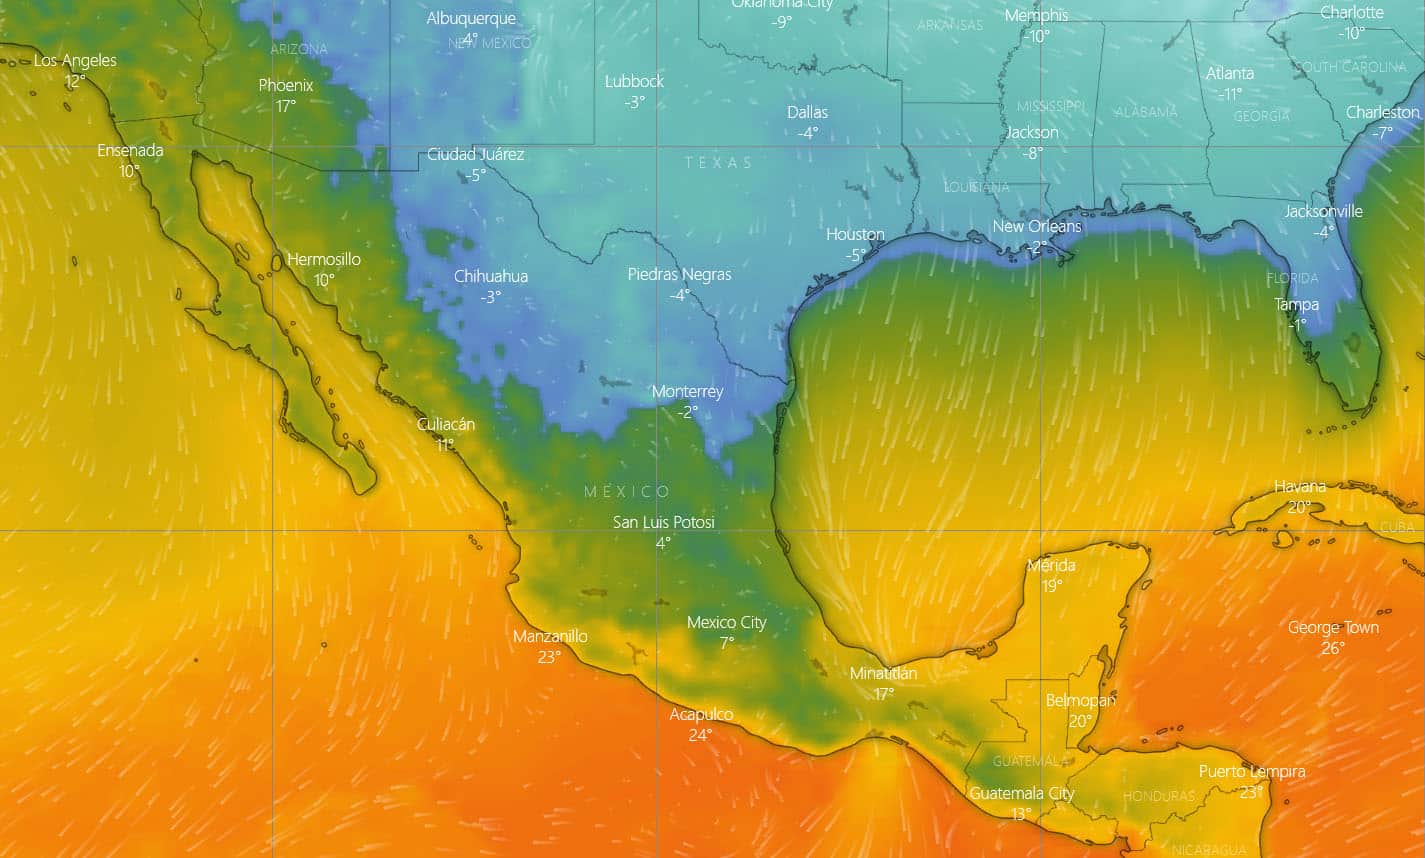 A map of Mexico and the southern U.S. color-coded by predicted temperature. Much of the border region is blue.